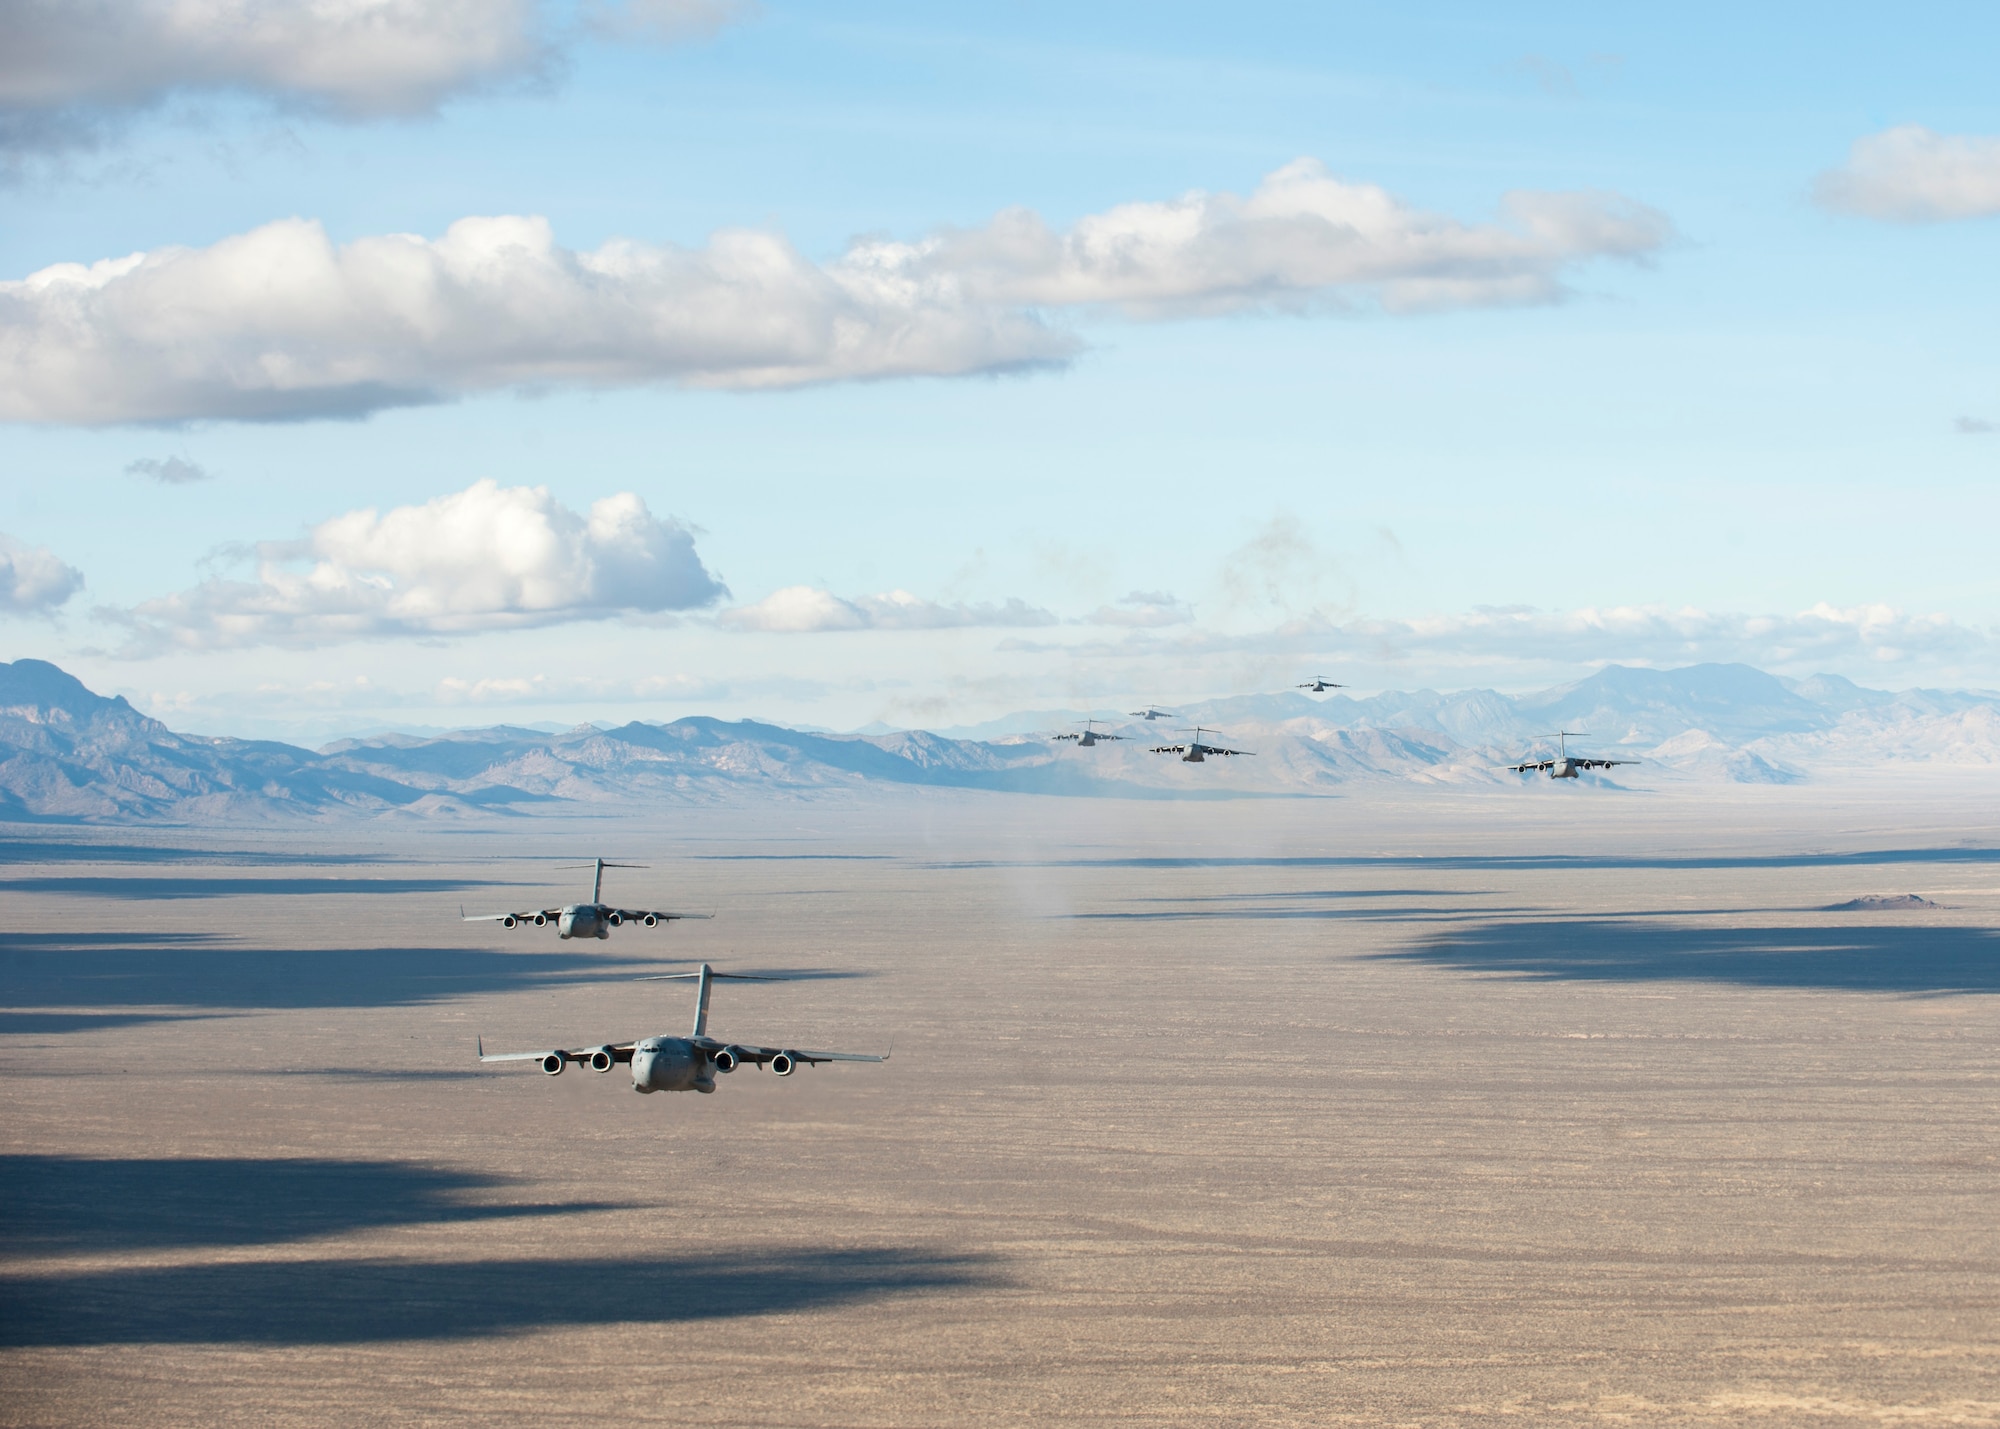 A formation of U.S. Air Force C-17 Globemaster IIIs fly over the Nevada Test and Training Range to participate in the U.S. Air Force Weapons School's Joint Forcible Entry Exercise 14B Dec. 6, 2014. Students participating in JFEX must synchronize aircraft movements from geographically separated bases, command large formations of dissimilar aircraft in high-threat airspace, and tactically deliver and recover combat forces via air drops and combat landings on an unimproved landing strip. (U.S. Air Force photo by Senior Airman Thomas Spangler)